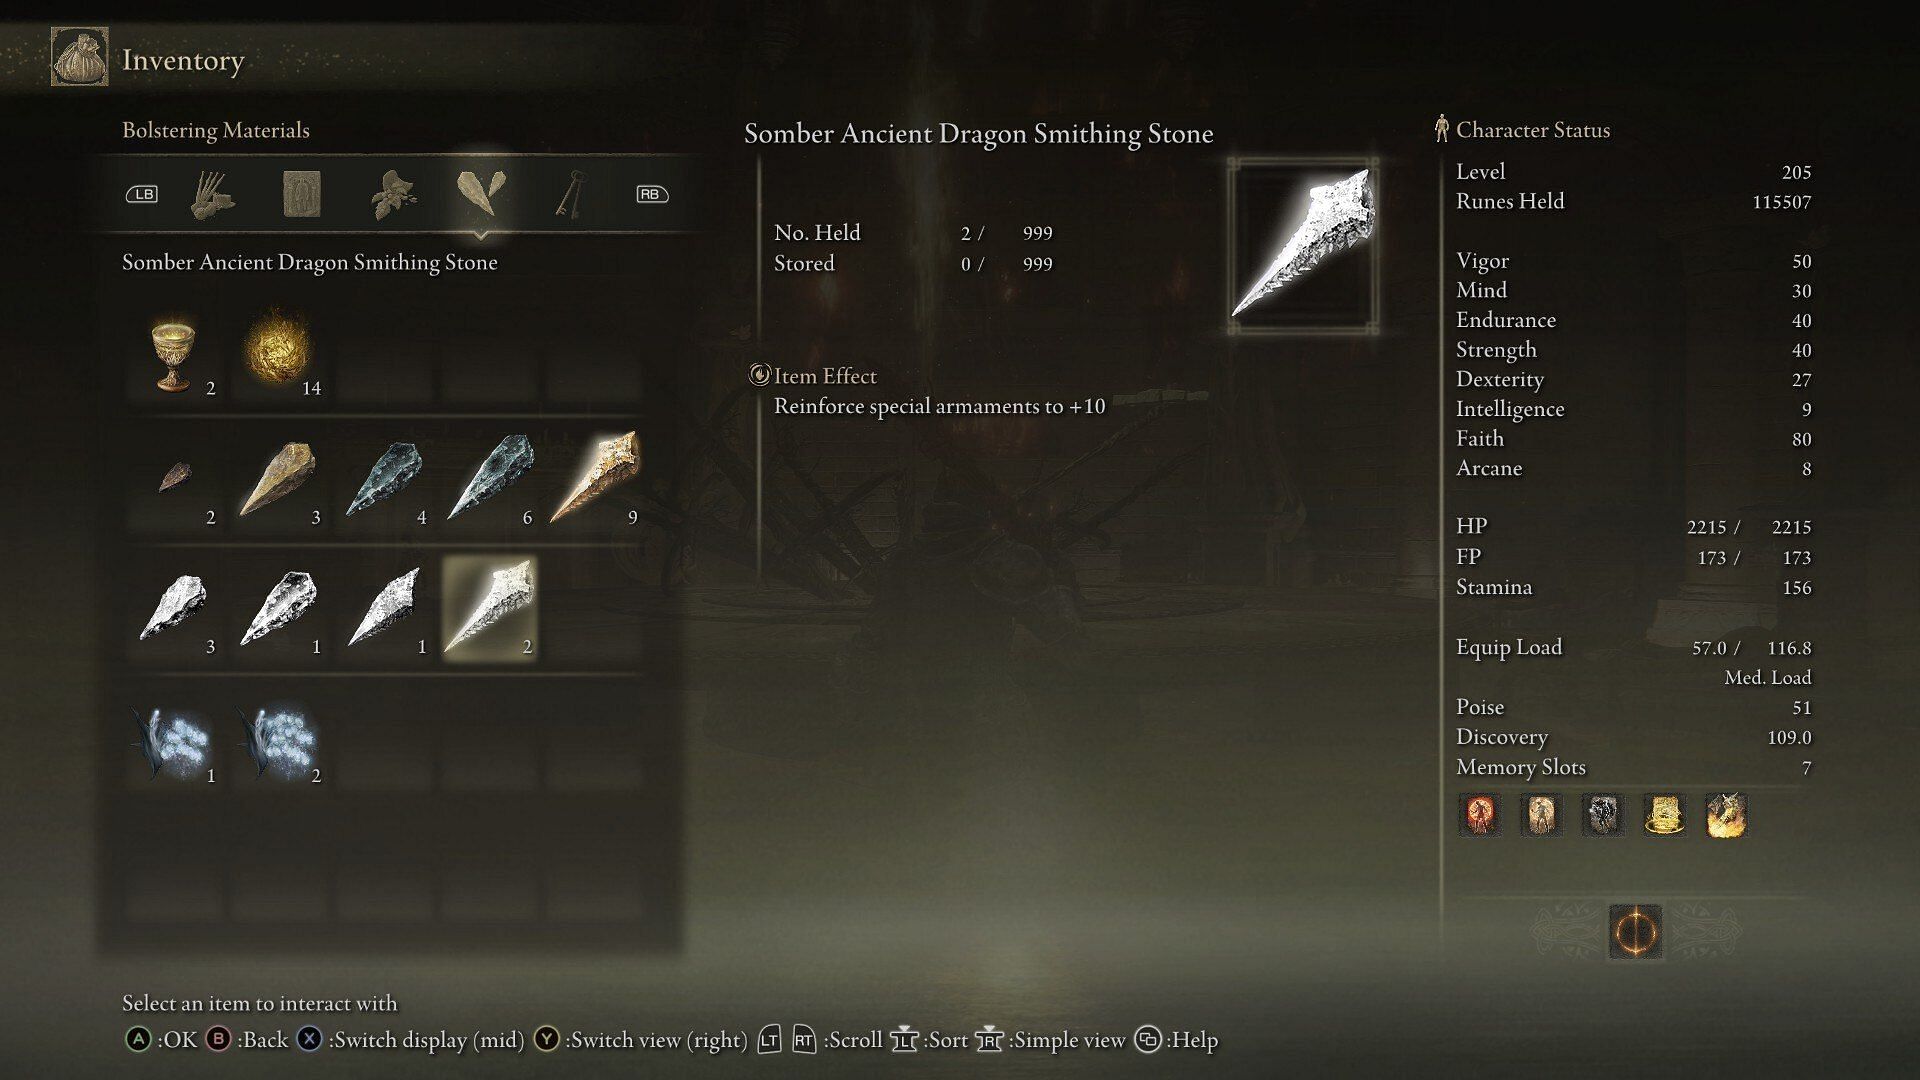 The Somber Ancient Dragon Smithing Stone in Elden Ring (Image via FromSoftware)